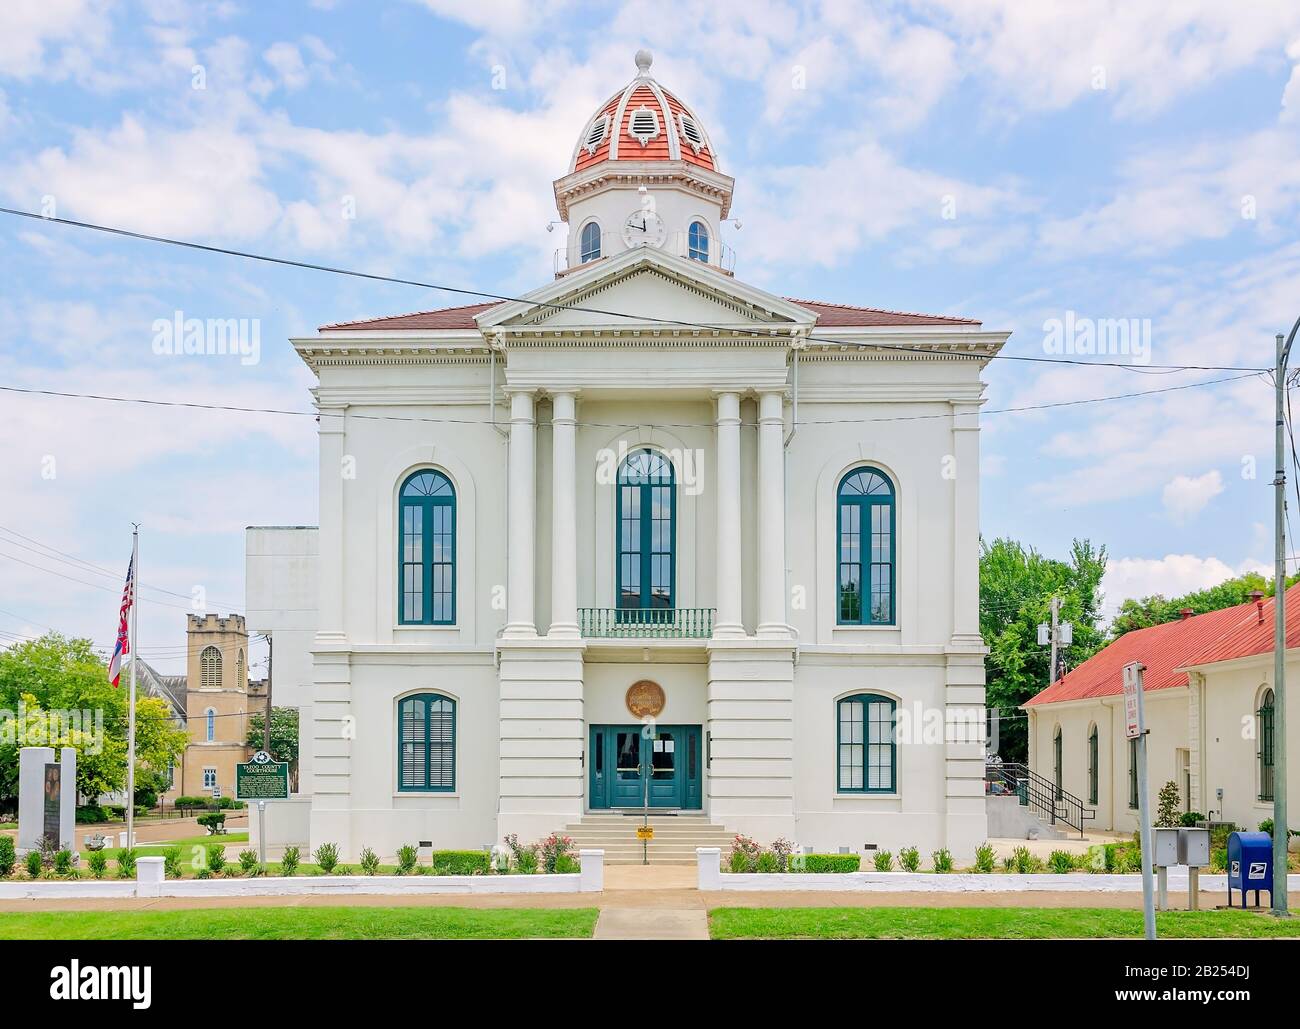 The Yazoo County Courthouse is pictured in Yazoo City, Mississippi. The Yazoo County Courthouse, built in 1872, is an Italianate stuccoed brick. Stock Photo